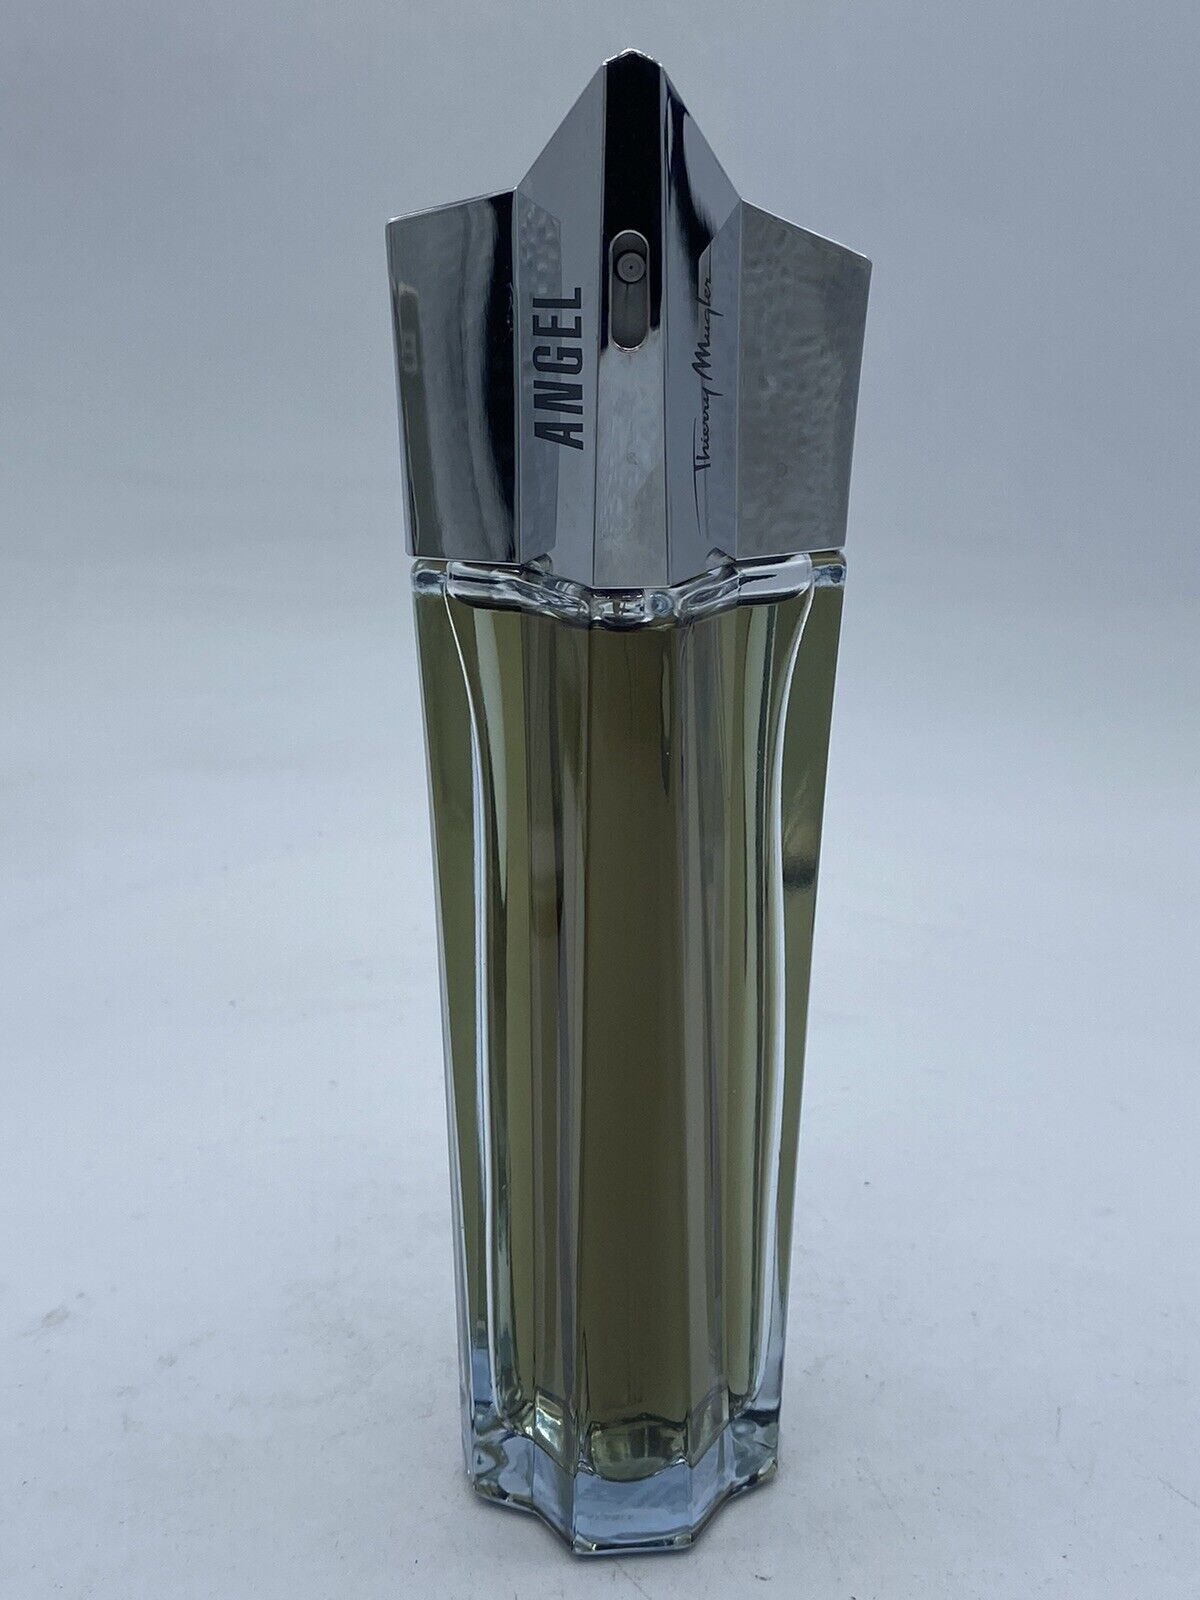 Angel Women Thierry Mugler EDP Spray 3.4 oz. 100 Ml. About 95% Full See Details.